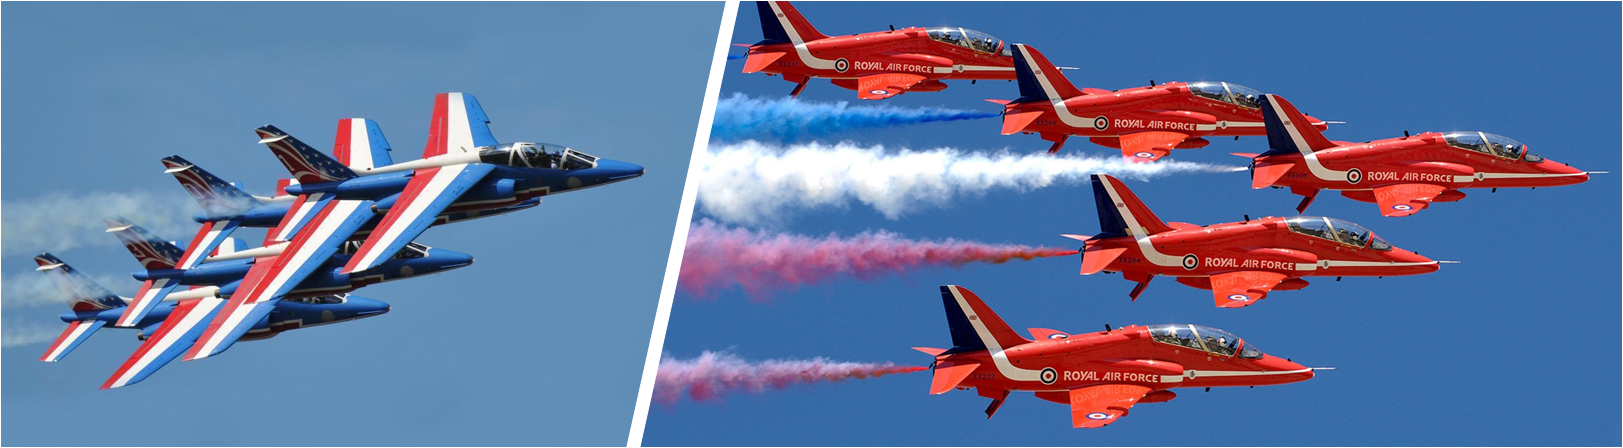 COLLAGE patrouille france red arrows